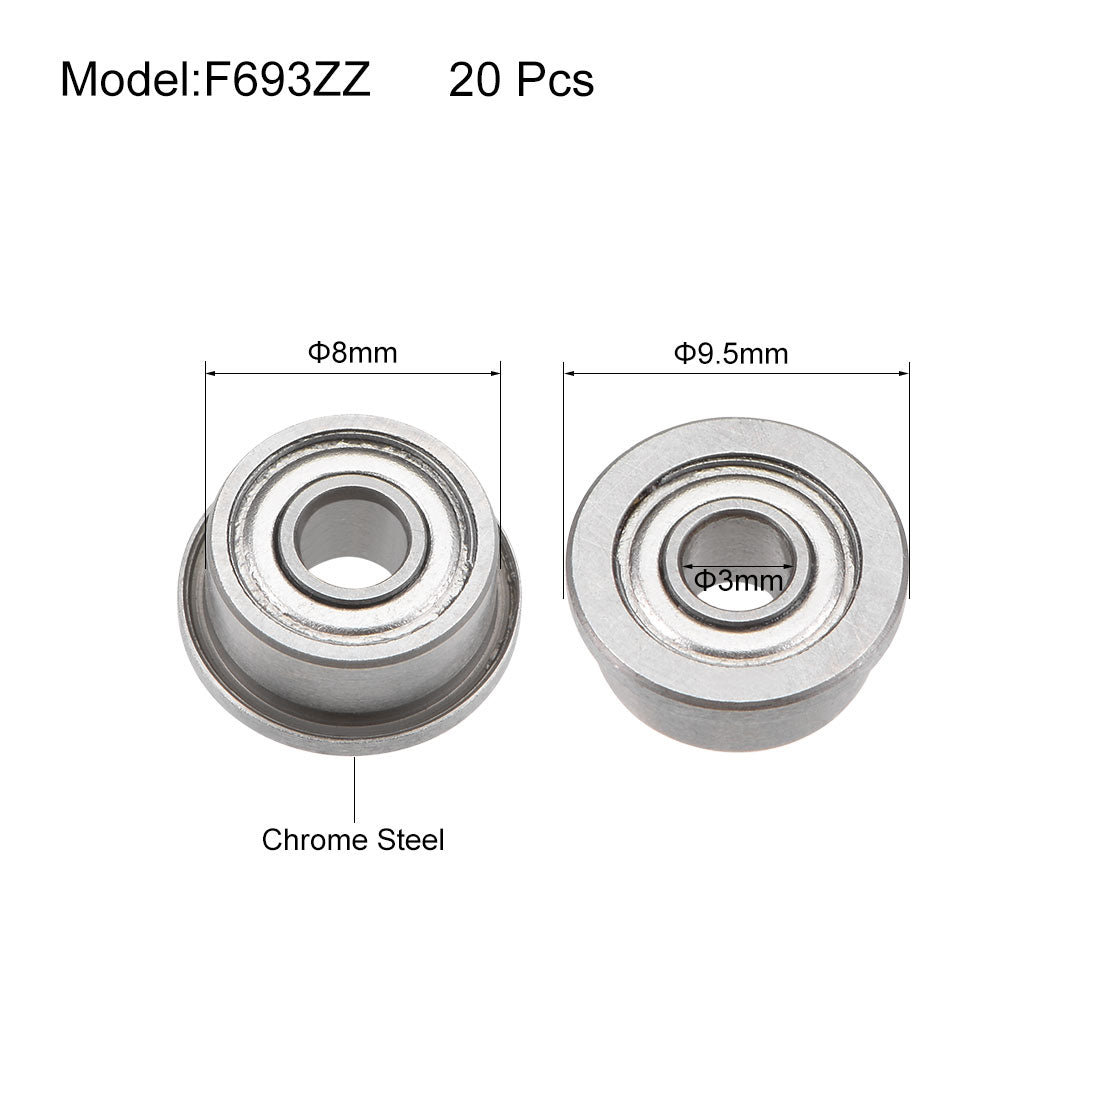 uxcell Uxcell F693ZZ Flange Ball Bearing 3mmx8mmx4mm Double Shielded Chrome Bearings 20 Pcs